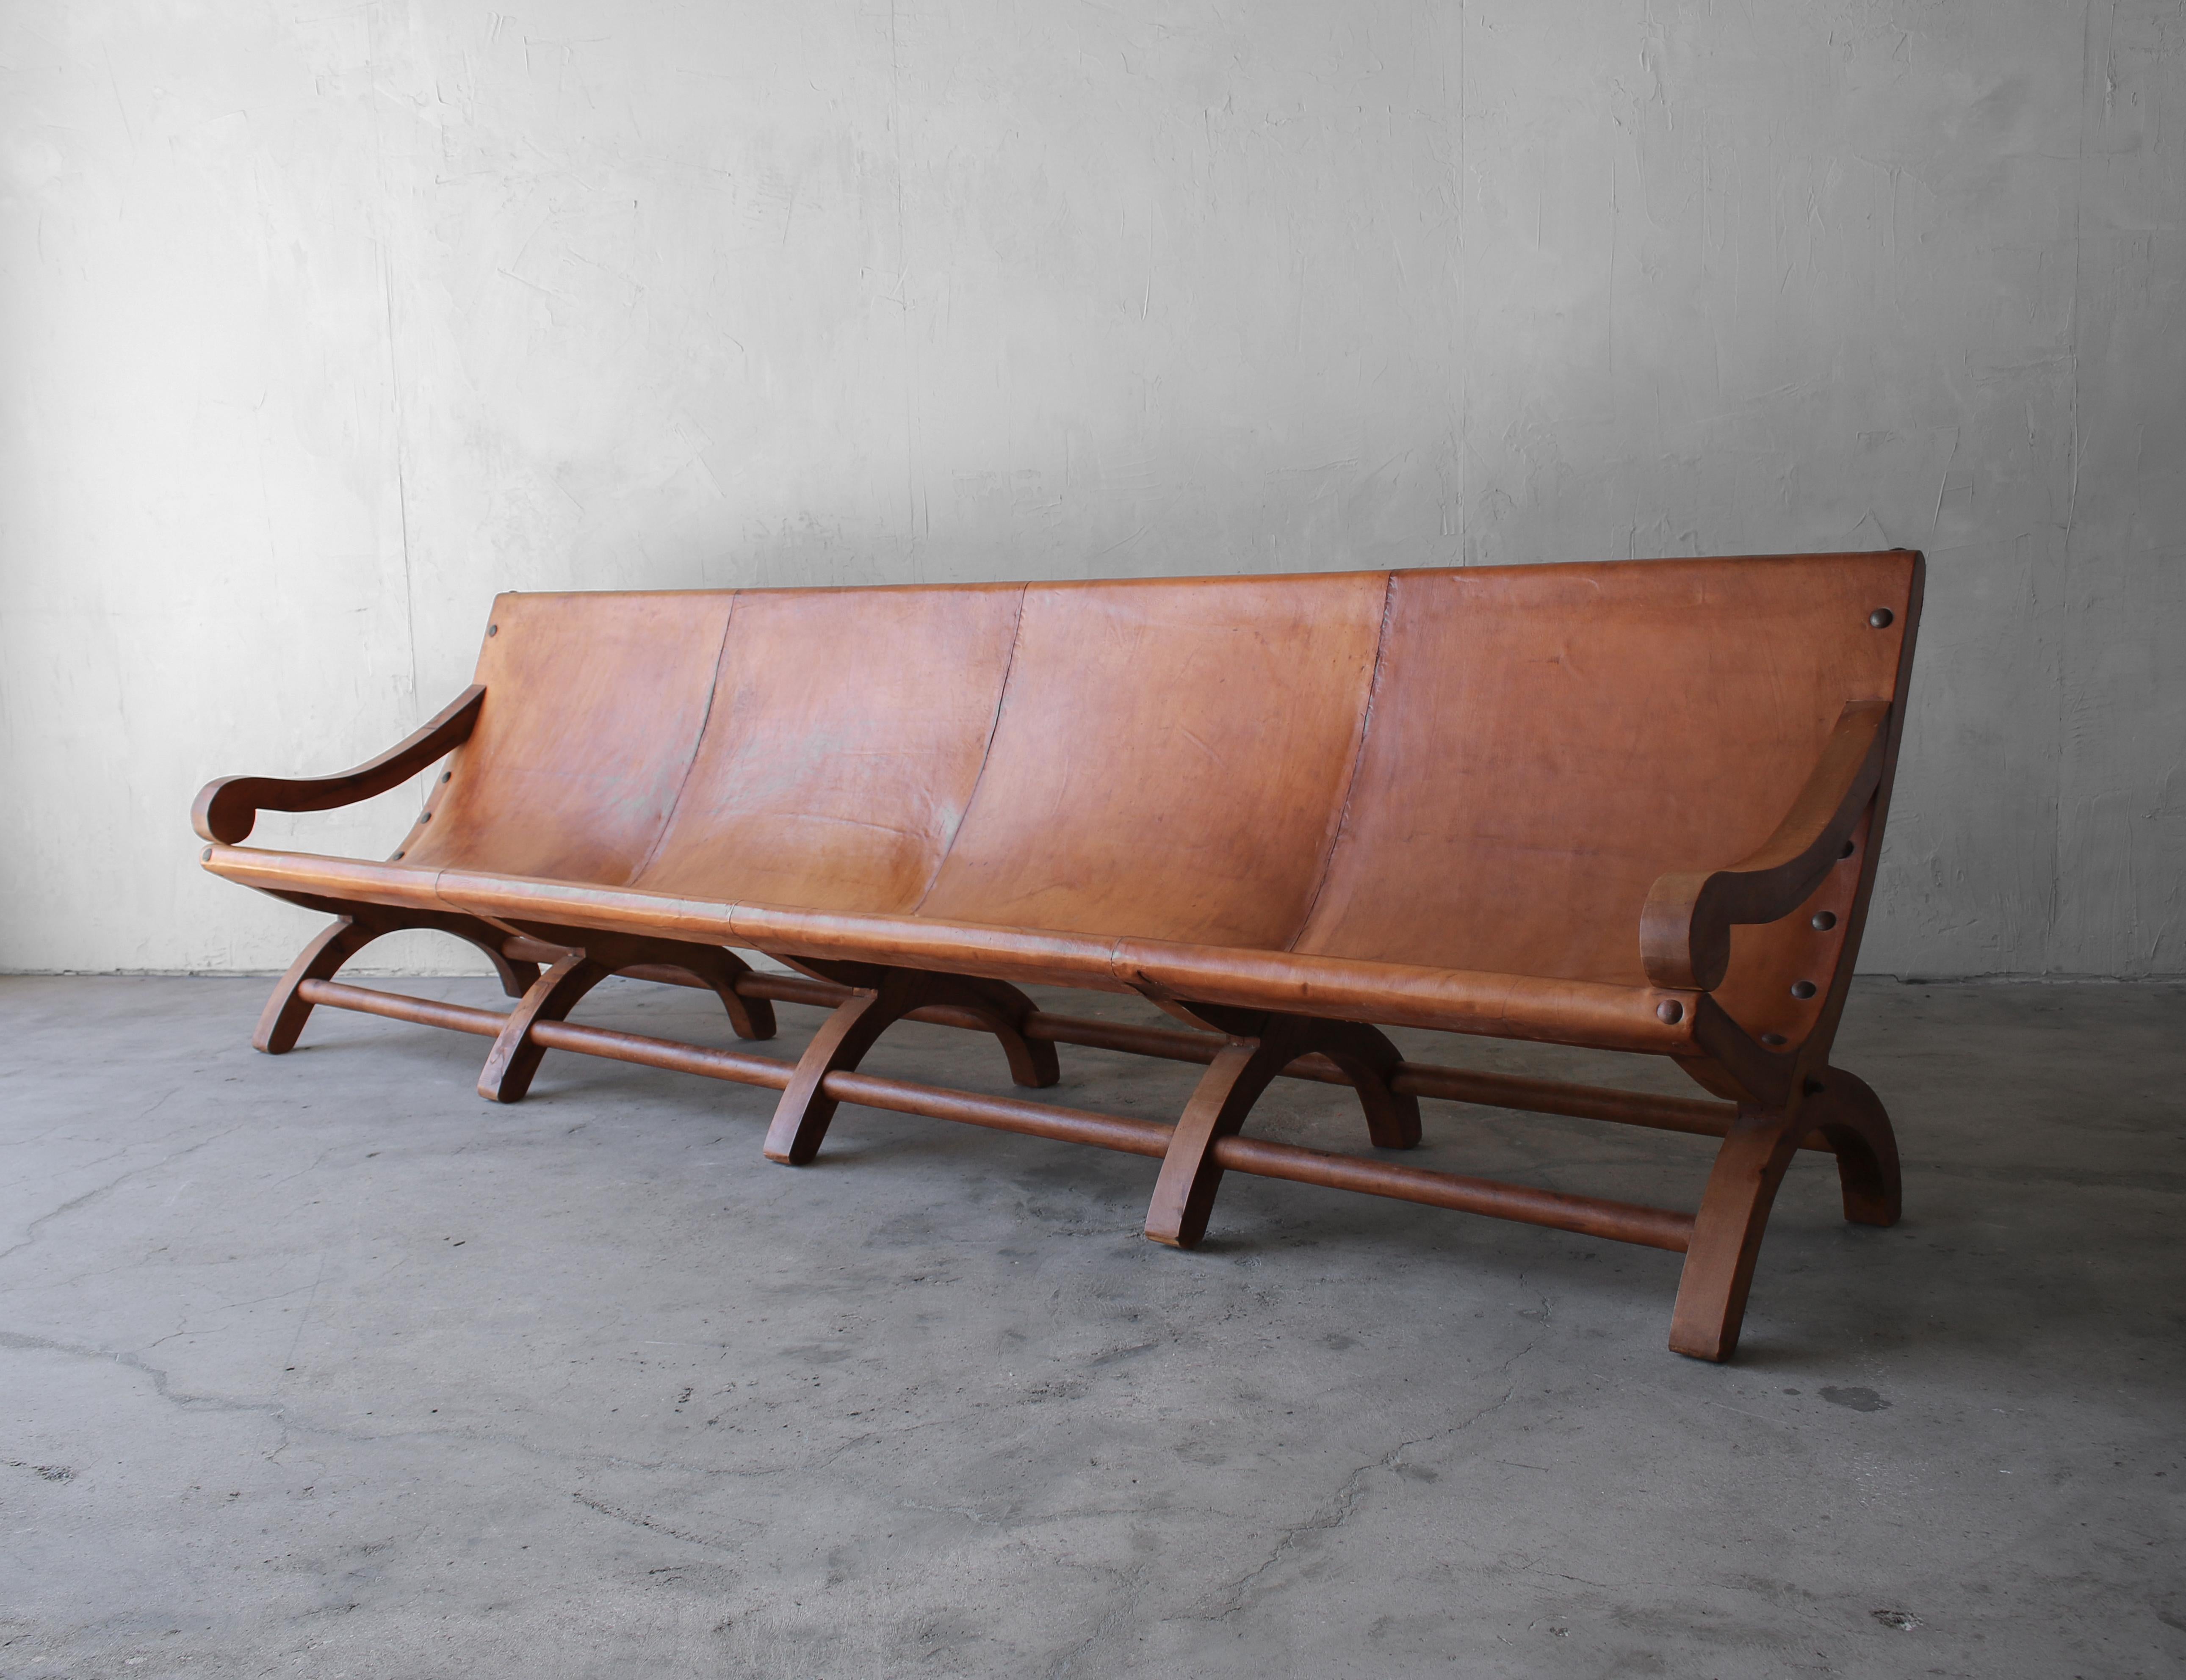 This vintage Butaque leather sling sofa is 10 feet of amazing. It was custom designed by the original owner made in Mexico in 1978.

Oversized and huge on character and style. This beauty is a sight to behold. With all the amazing details o